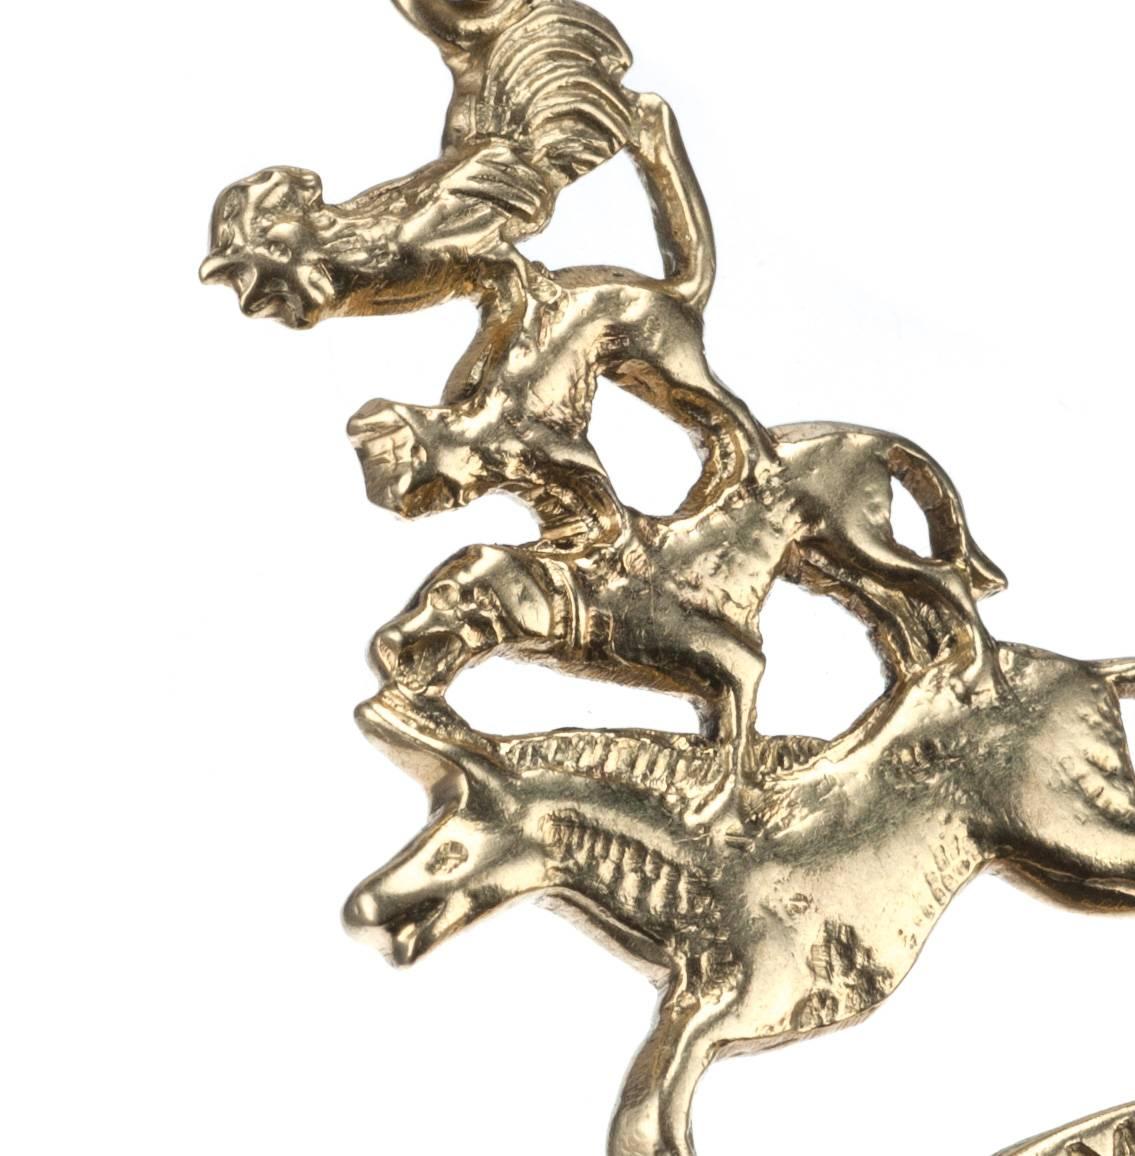 Based on the ‘Bremen Town Musicians’ fable, a 14-karat yellow gold charm featuring the titular characters: the donkey, dog, cat and rooster. Includes jump ring. Measures approx. 1.25” long. 